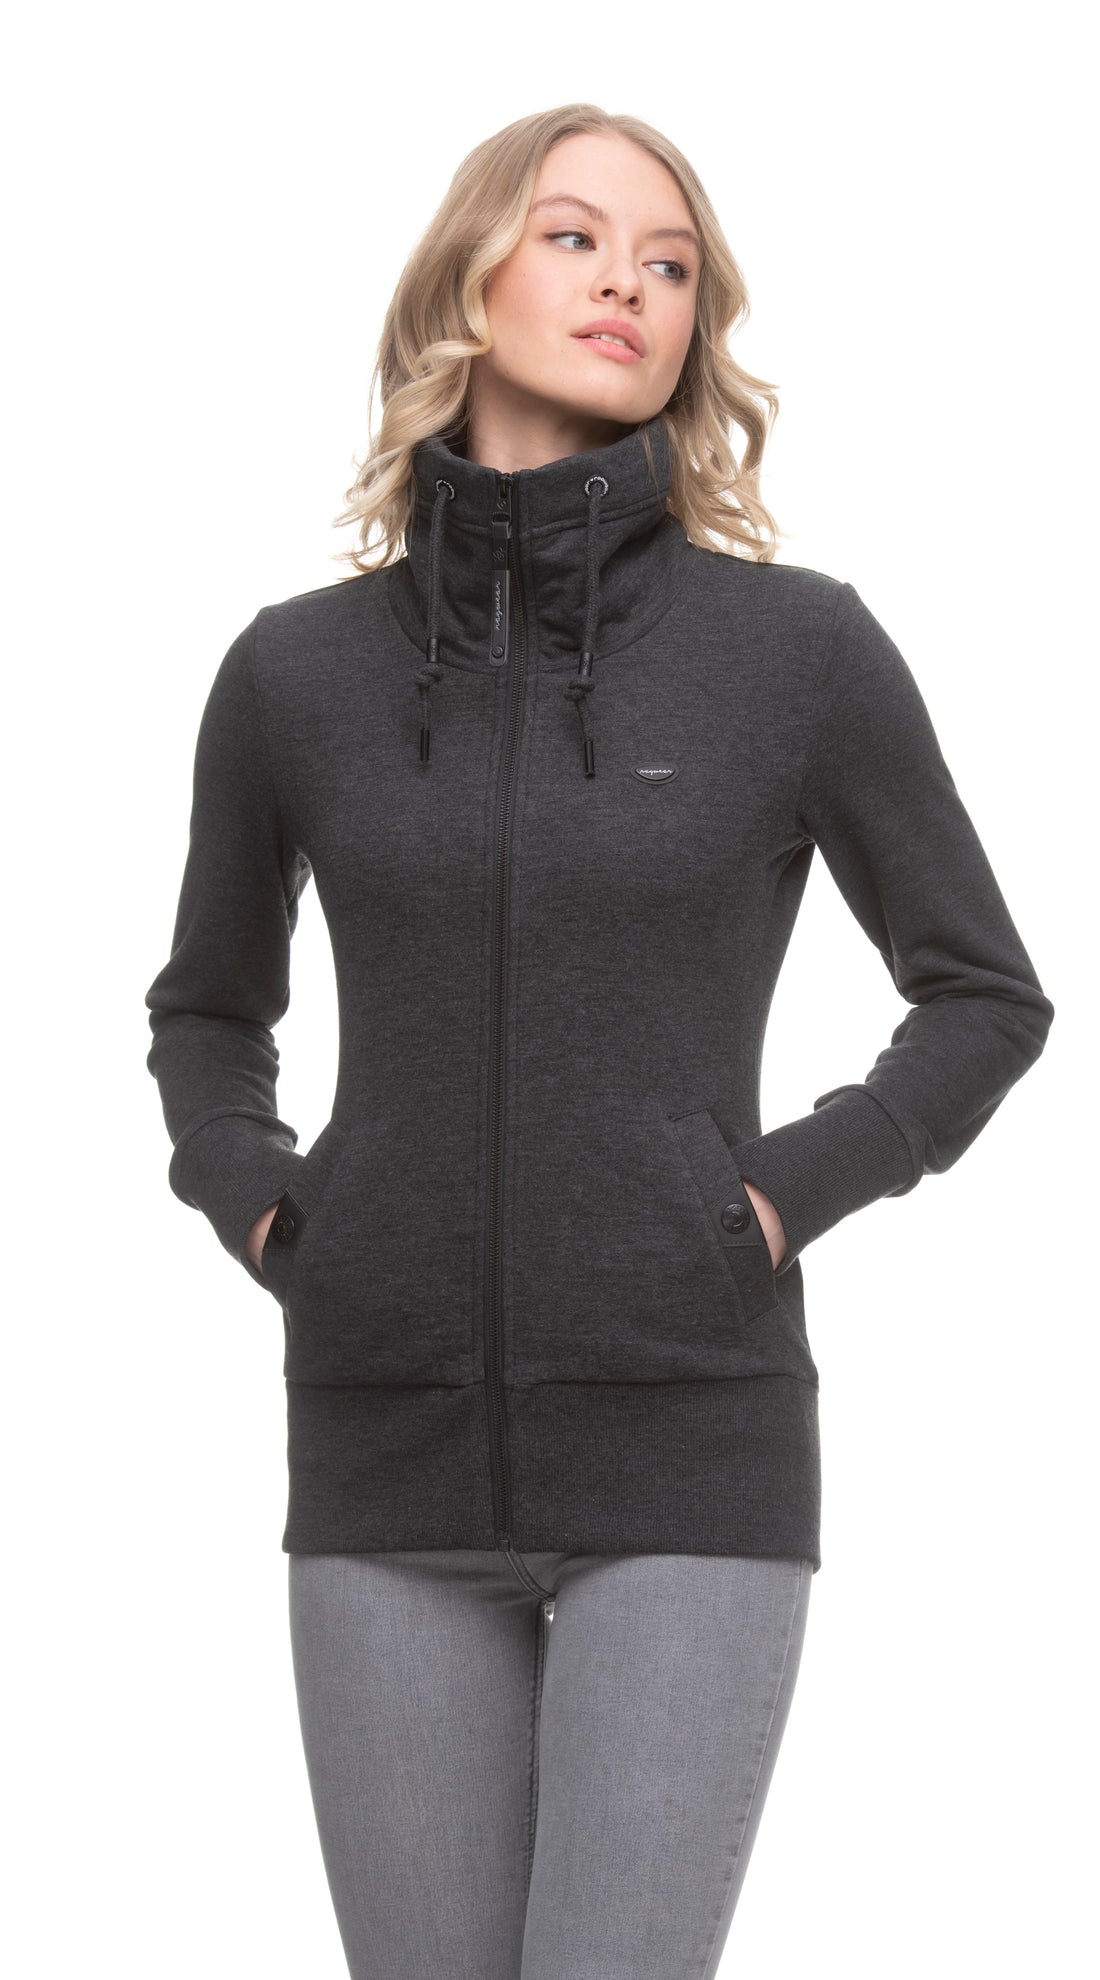 Women's Calvin Klein Sweaters − Sale: up to −81%